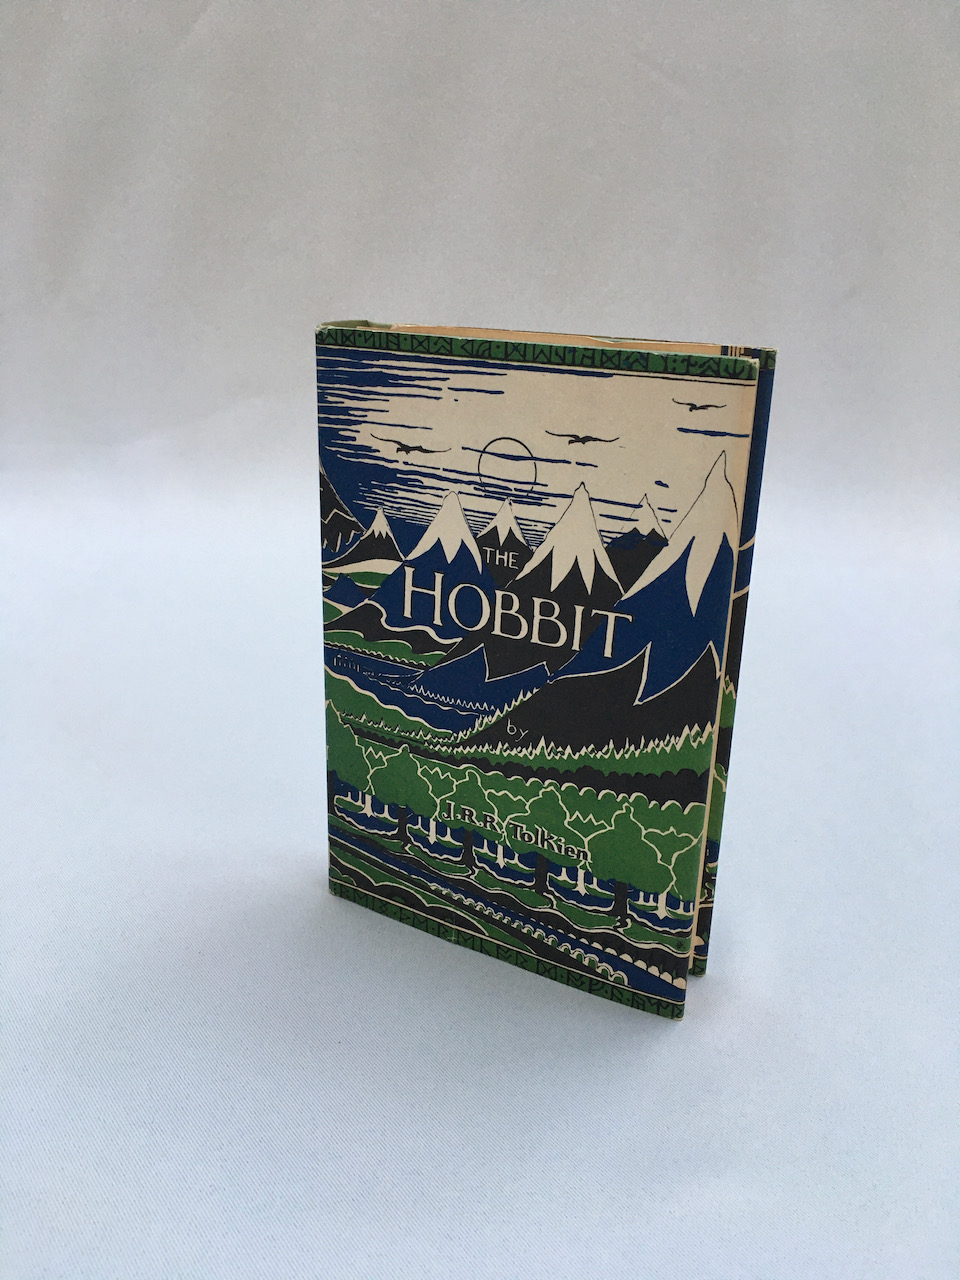 The Hobbit, or There and Back Again, by J.R.R. Tolkien. Published by Allen & Unwin in 1958